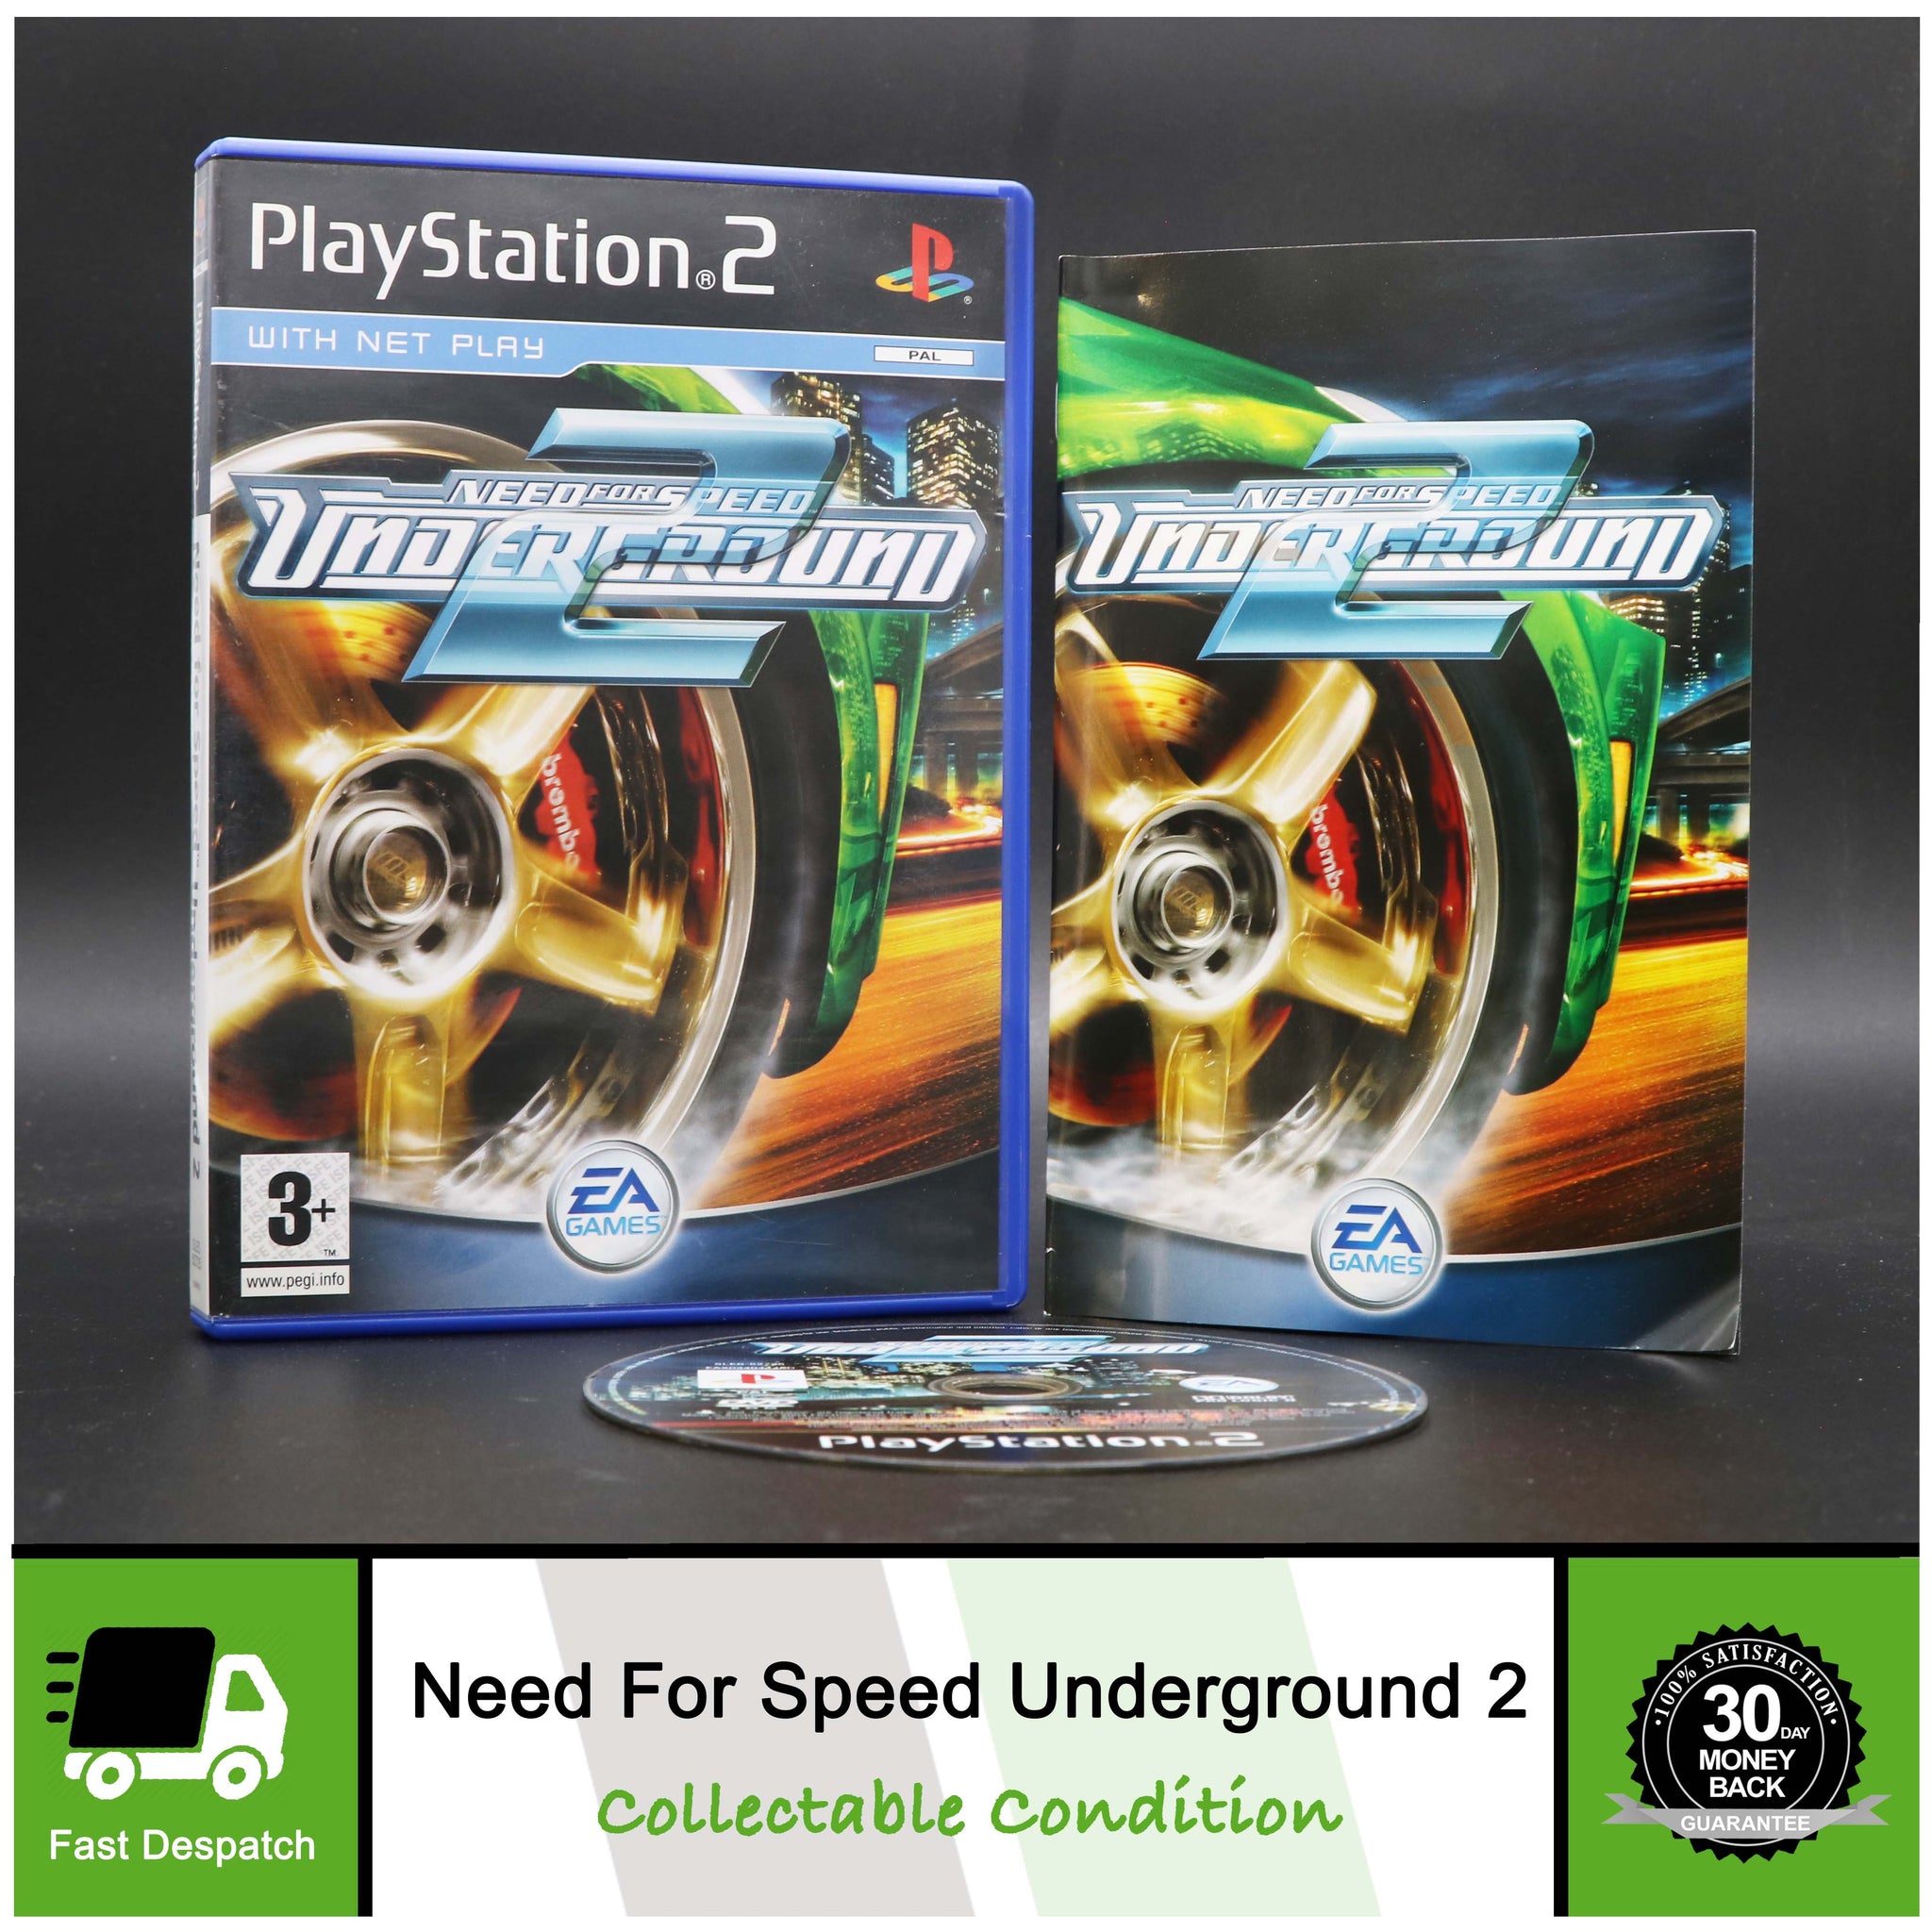 PC NEED FOR SPEED UNDERGROUND 2 Game PAL REGION FREE (Works in US)